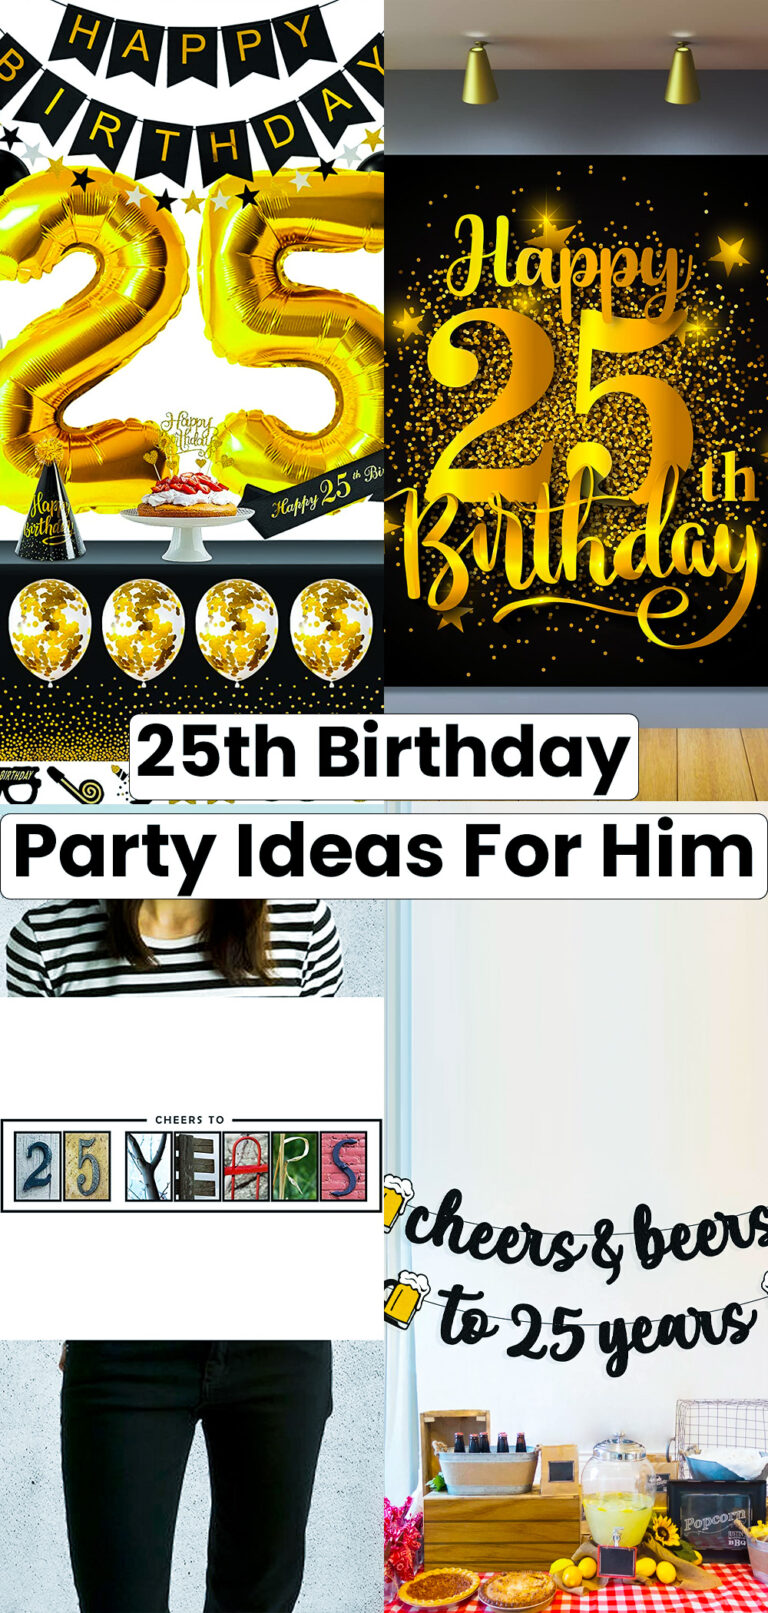 25th Birthday Party Ideas for Him